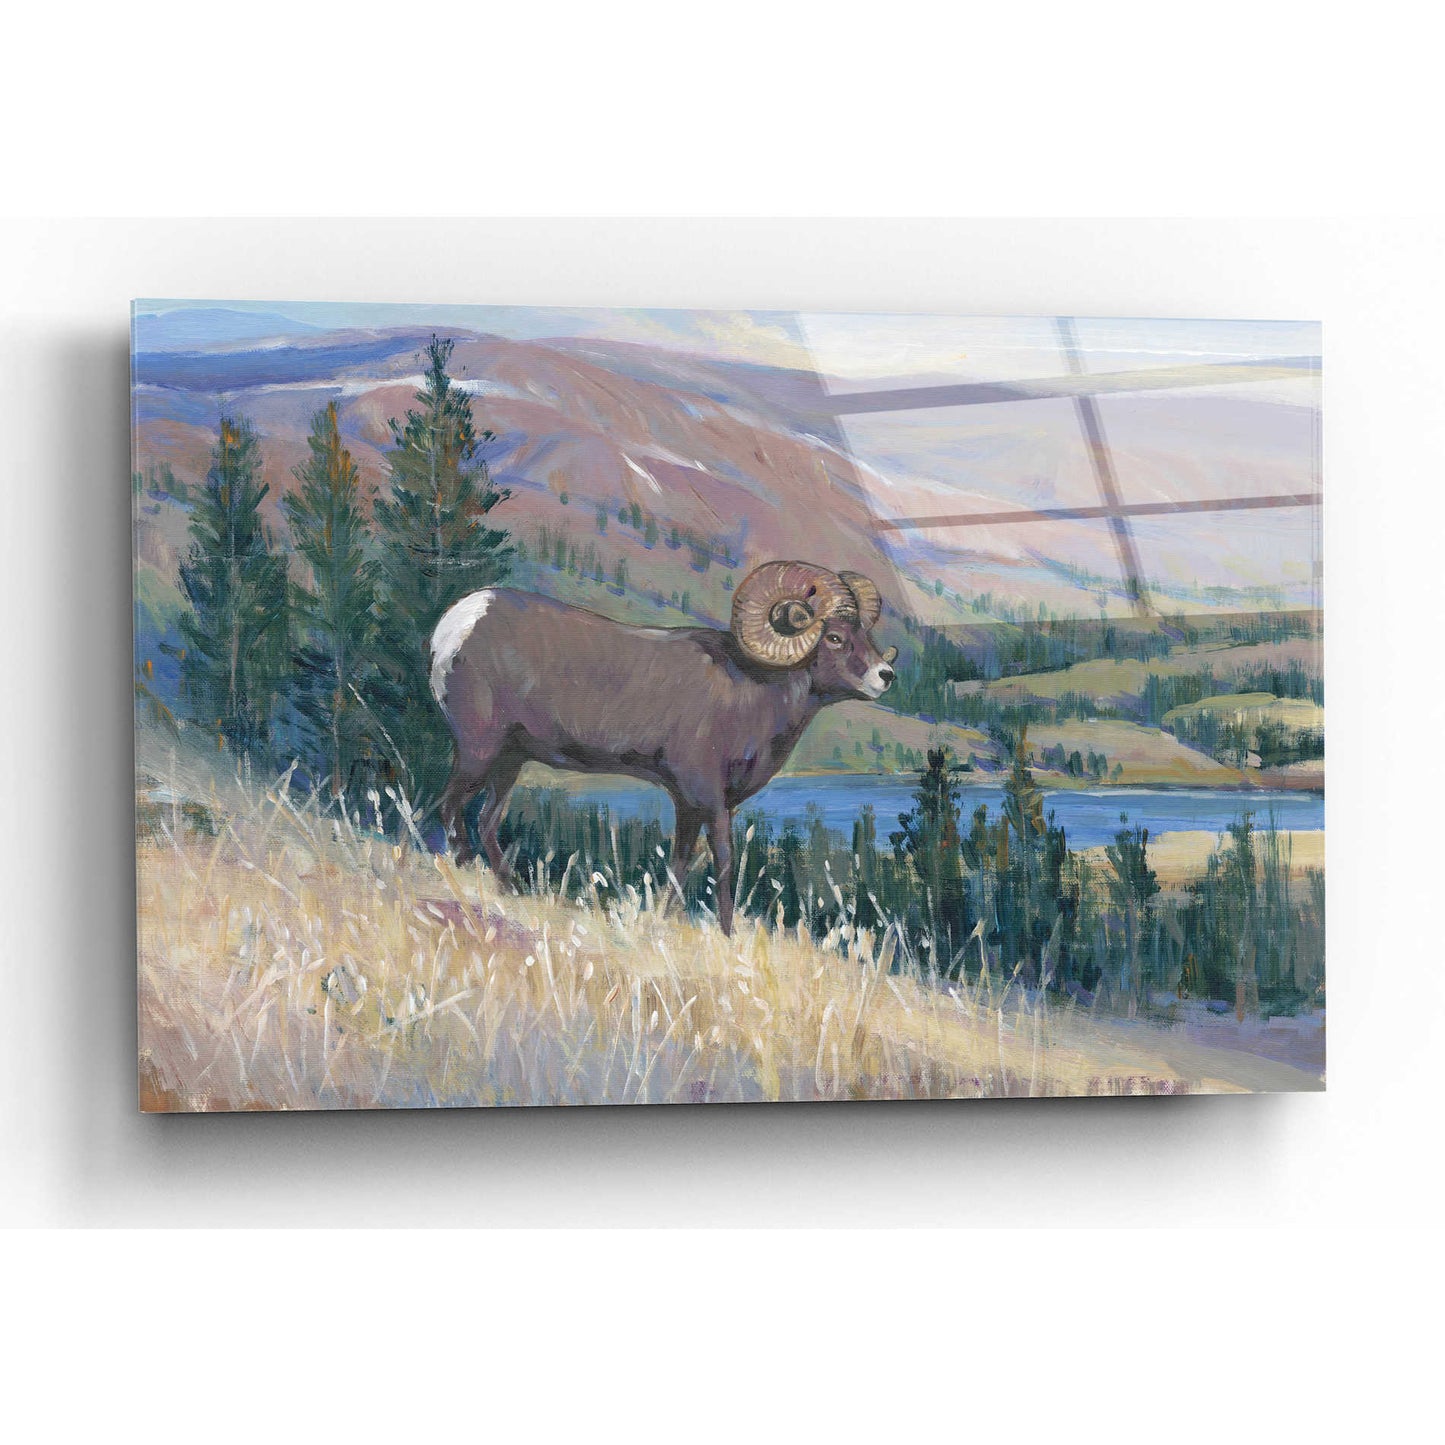 Epic Art 'Animals of the West III' by Tim O'Toole, Acrylic Glass Wall Art,16x12